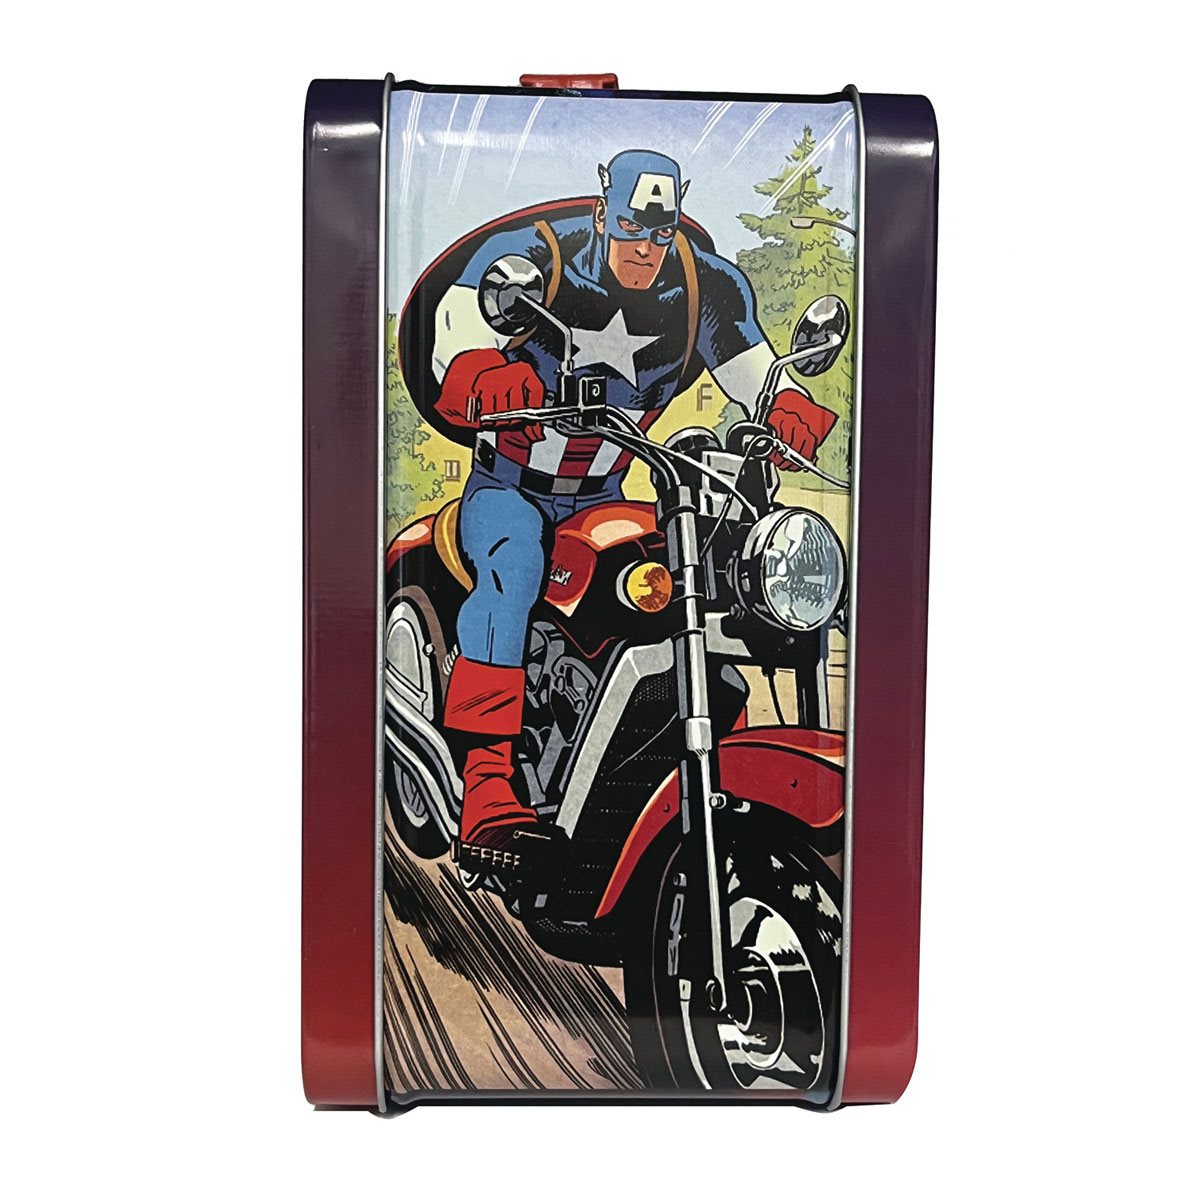 Power Rangers Tin Titans Lunch Box with Thermos - PX